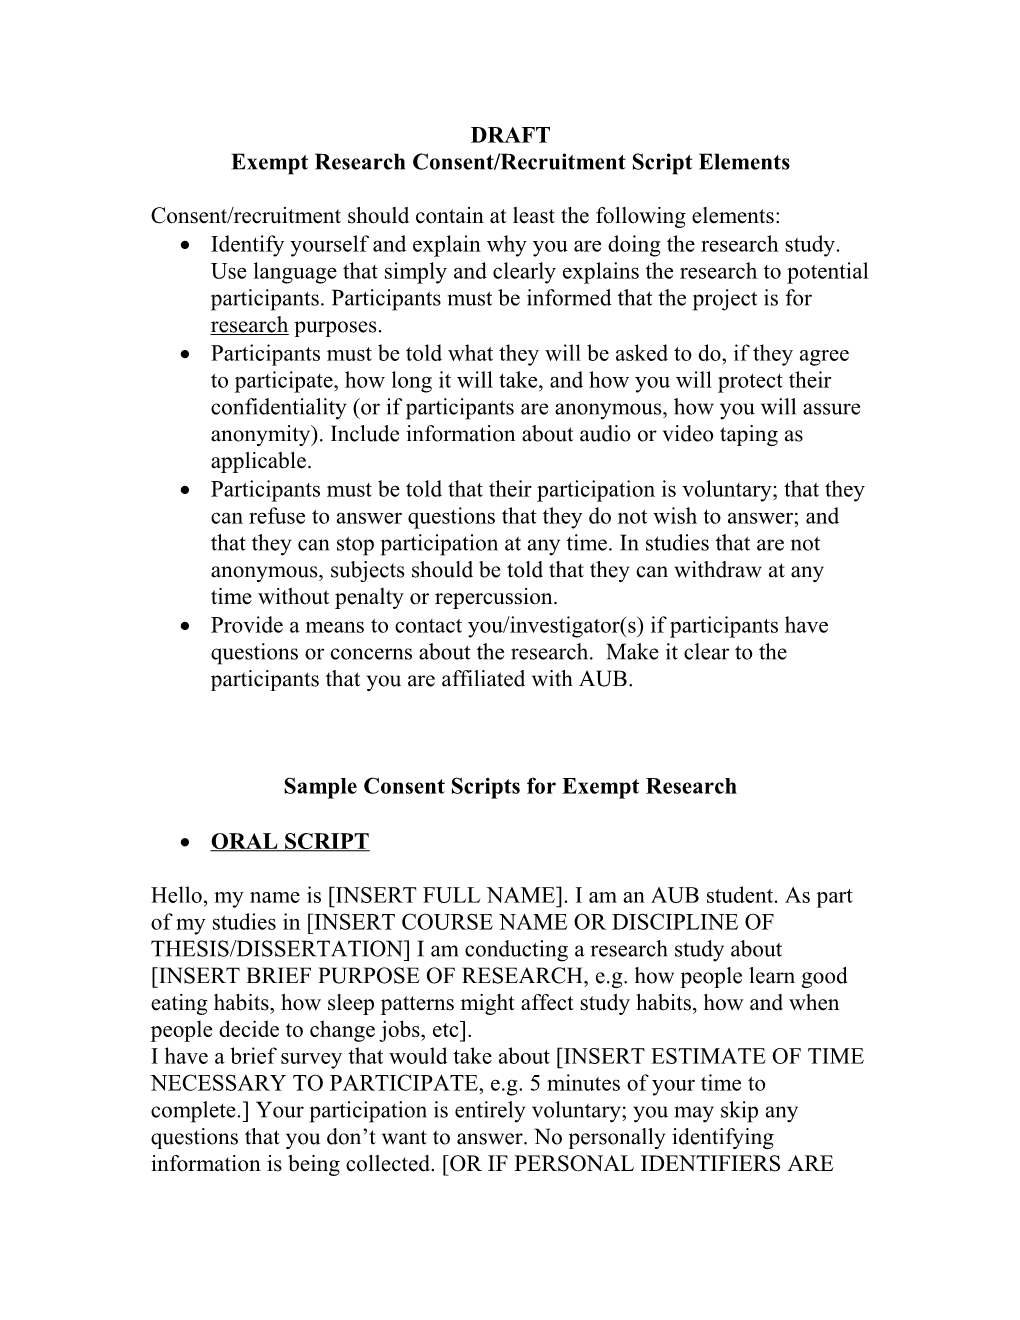 Sample Scripts for Exempt Research